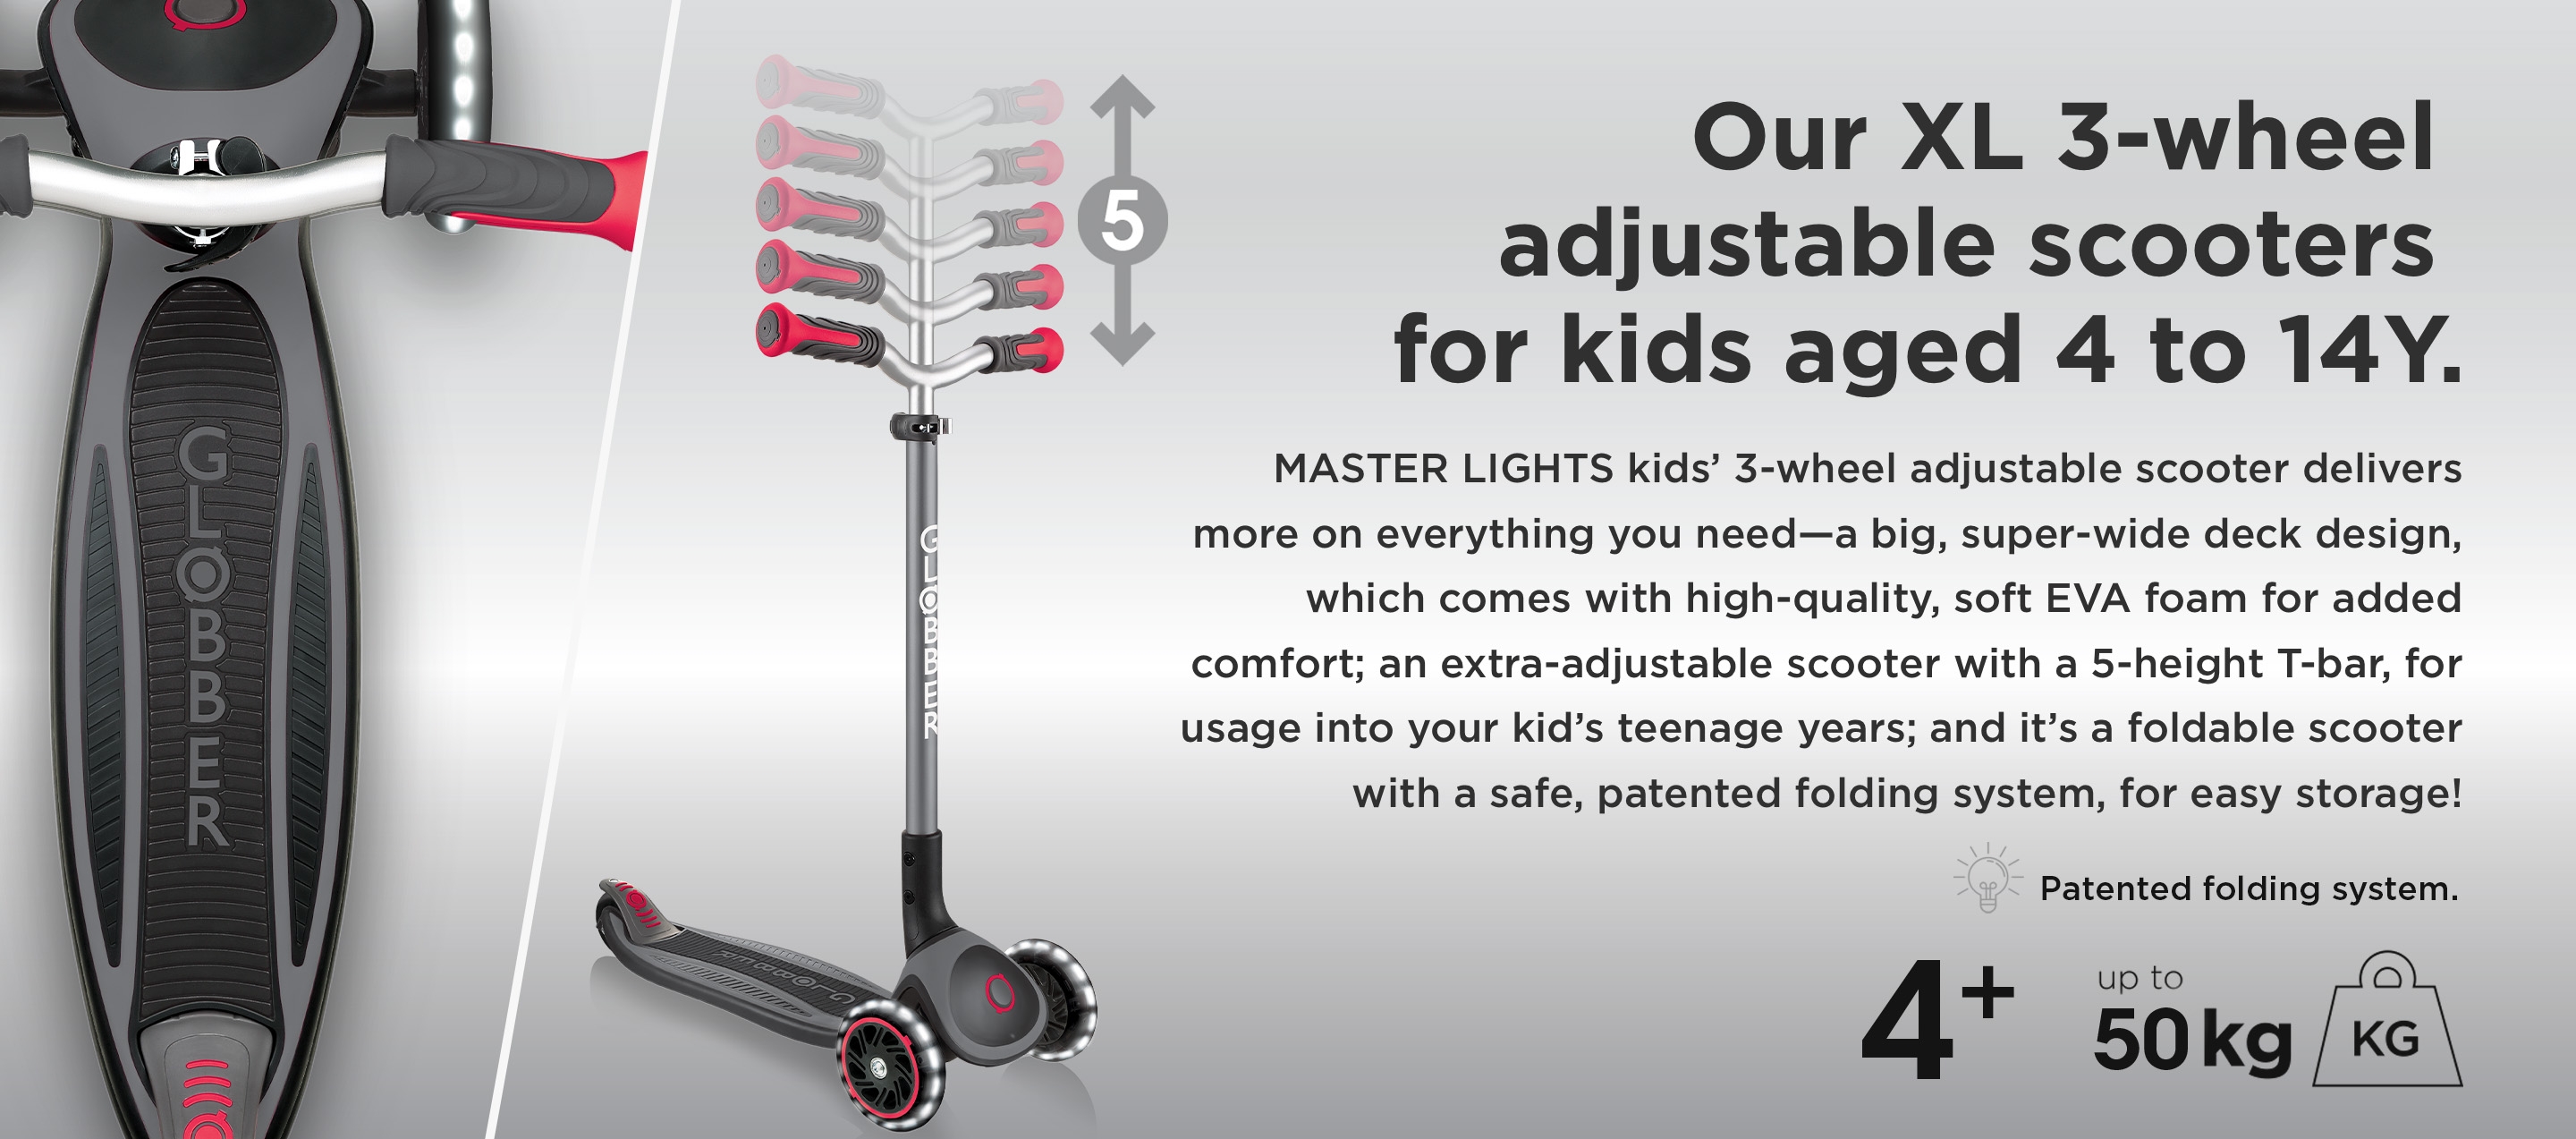 Our XL 3-wheel adjustable scooters for kids aged 4 to 14Y. MASTER LIGHTS kids’ 3-wheel adjustable scooter delivers more on everything you need—a big, super-wide deck design, which comes with high-quality, soft EVA foam for added comfort; an extra adjustable scooter with a 5-height T-bar, for usage into your kid’s teenage years; and it’s a foldable scooter with a safe, patented folding system, for easy storage!